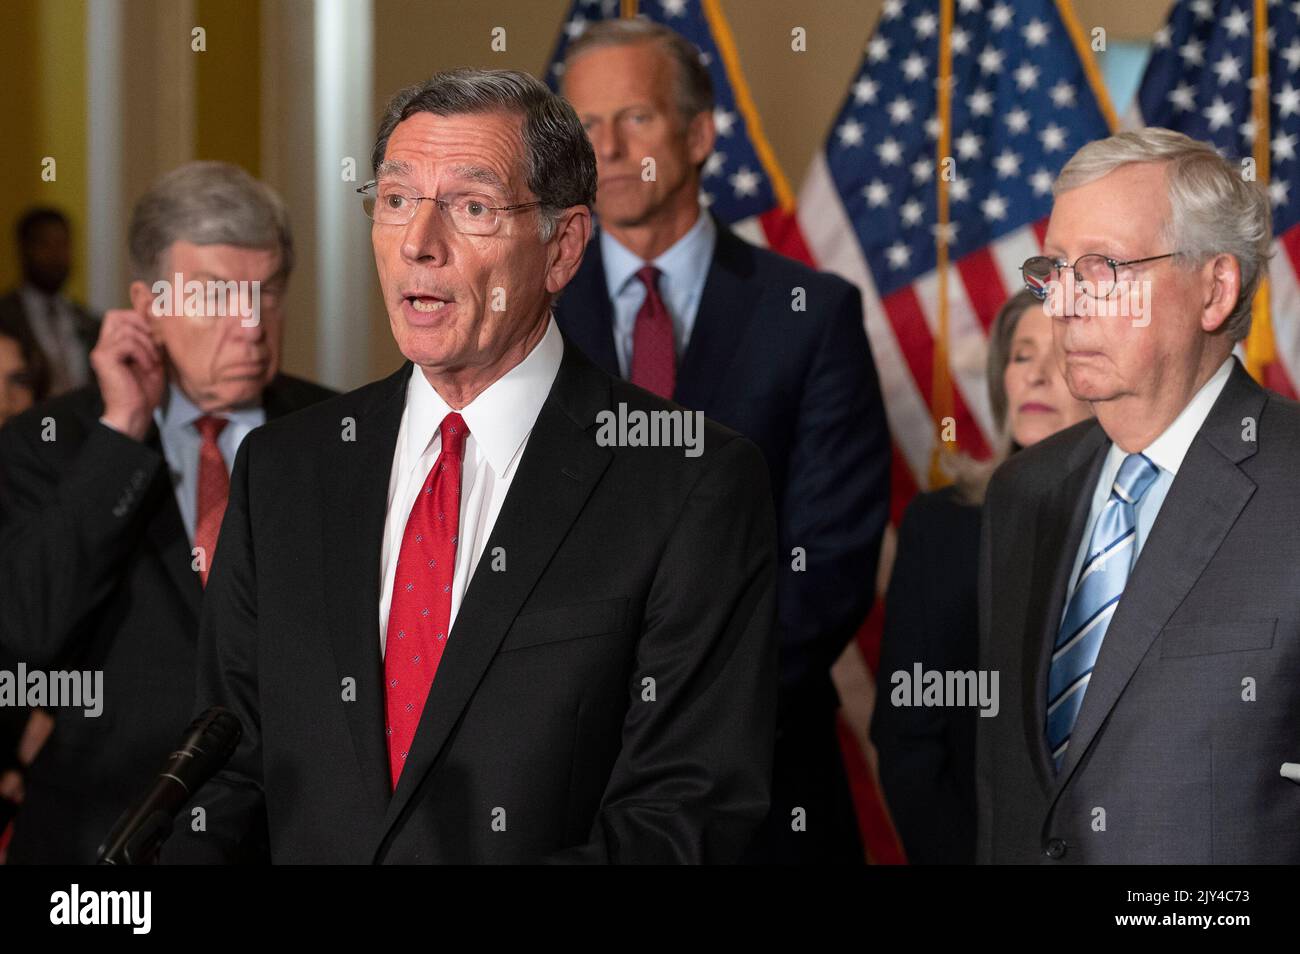 United States Senate Minority Leader Mitch McConnell (Republican of Kentucky), right, United States Senator John Thune (Republican of South Dakota), center back, United States Senator Roy Blunt (Republican of Missouri), left, look on as United States Senator John Barrasso (Republican of Wyoming) offers remarks during the Senate Republicans policy luncheon press conference, at the US Capitol in Washington, DC, Wednesday, September 7, 2022. Credit: Cliff Owen/CNP Stock Photo